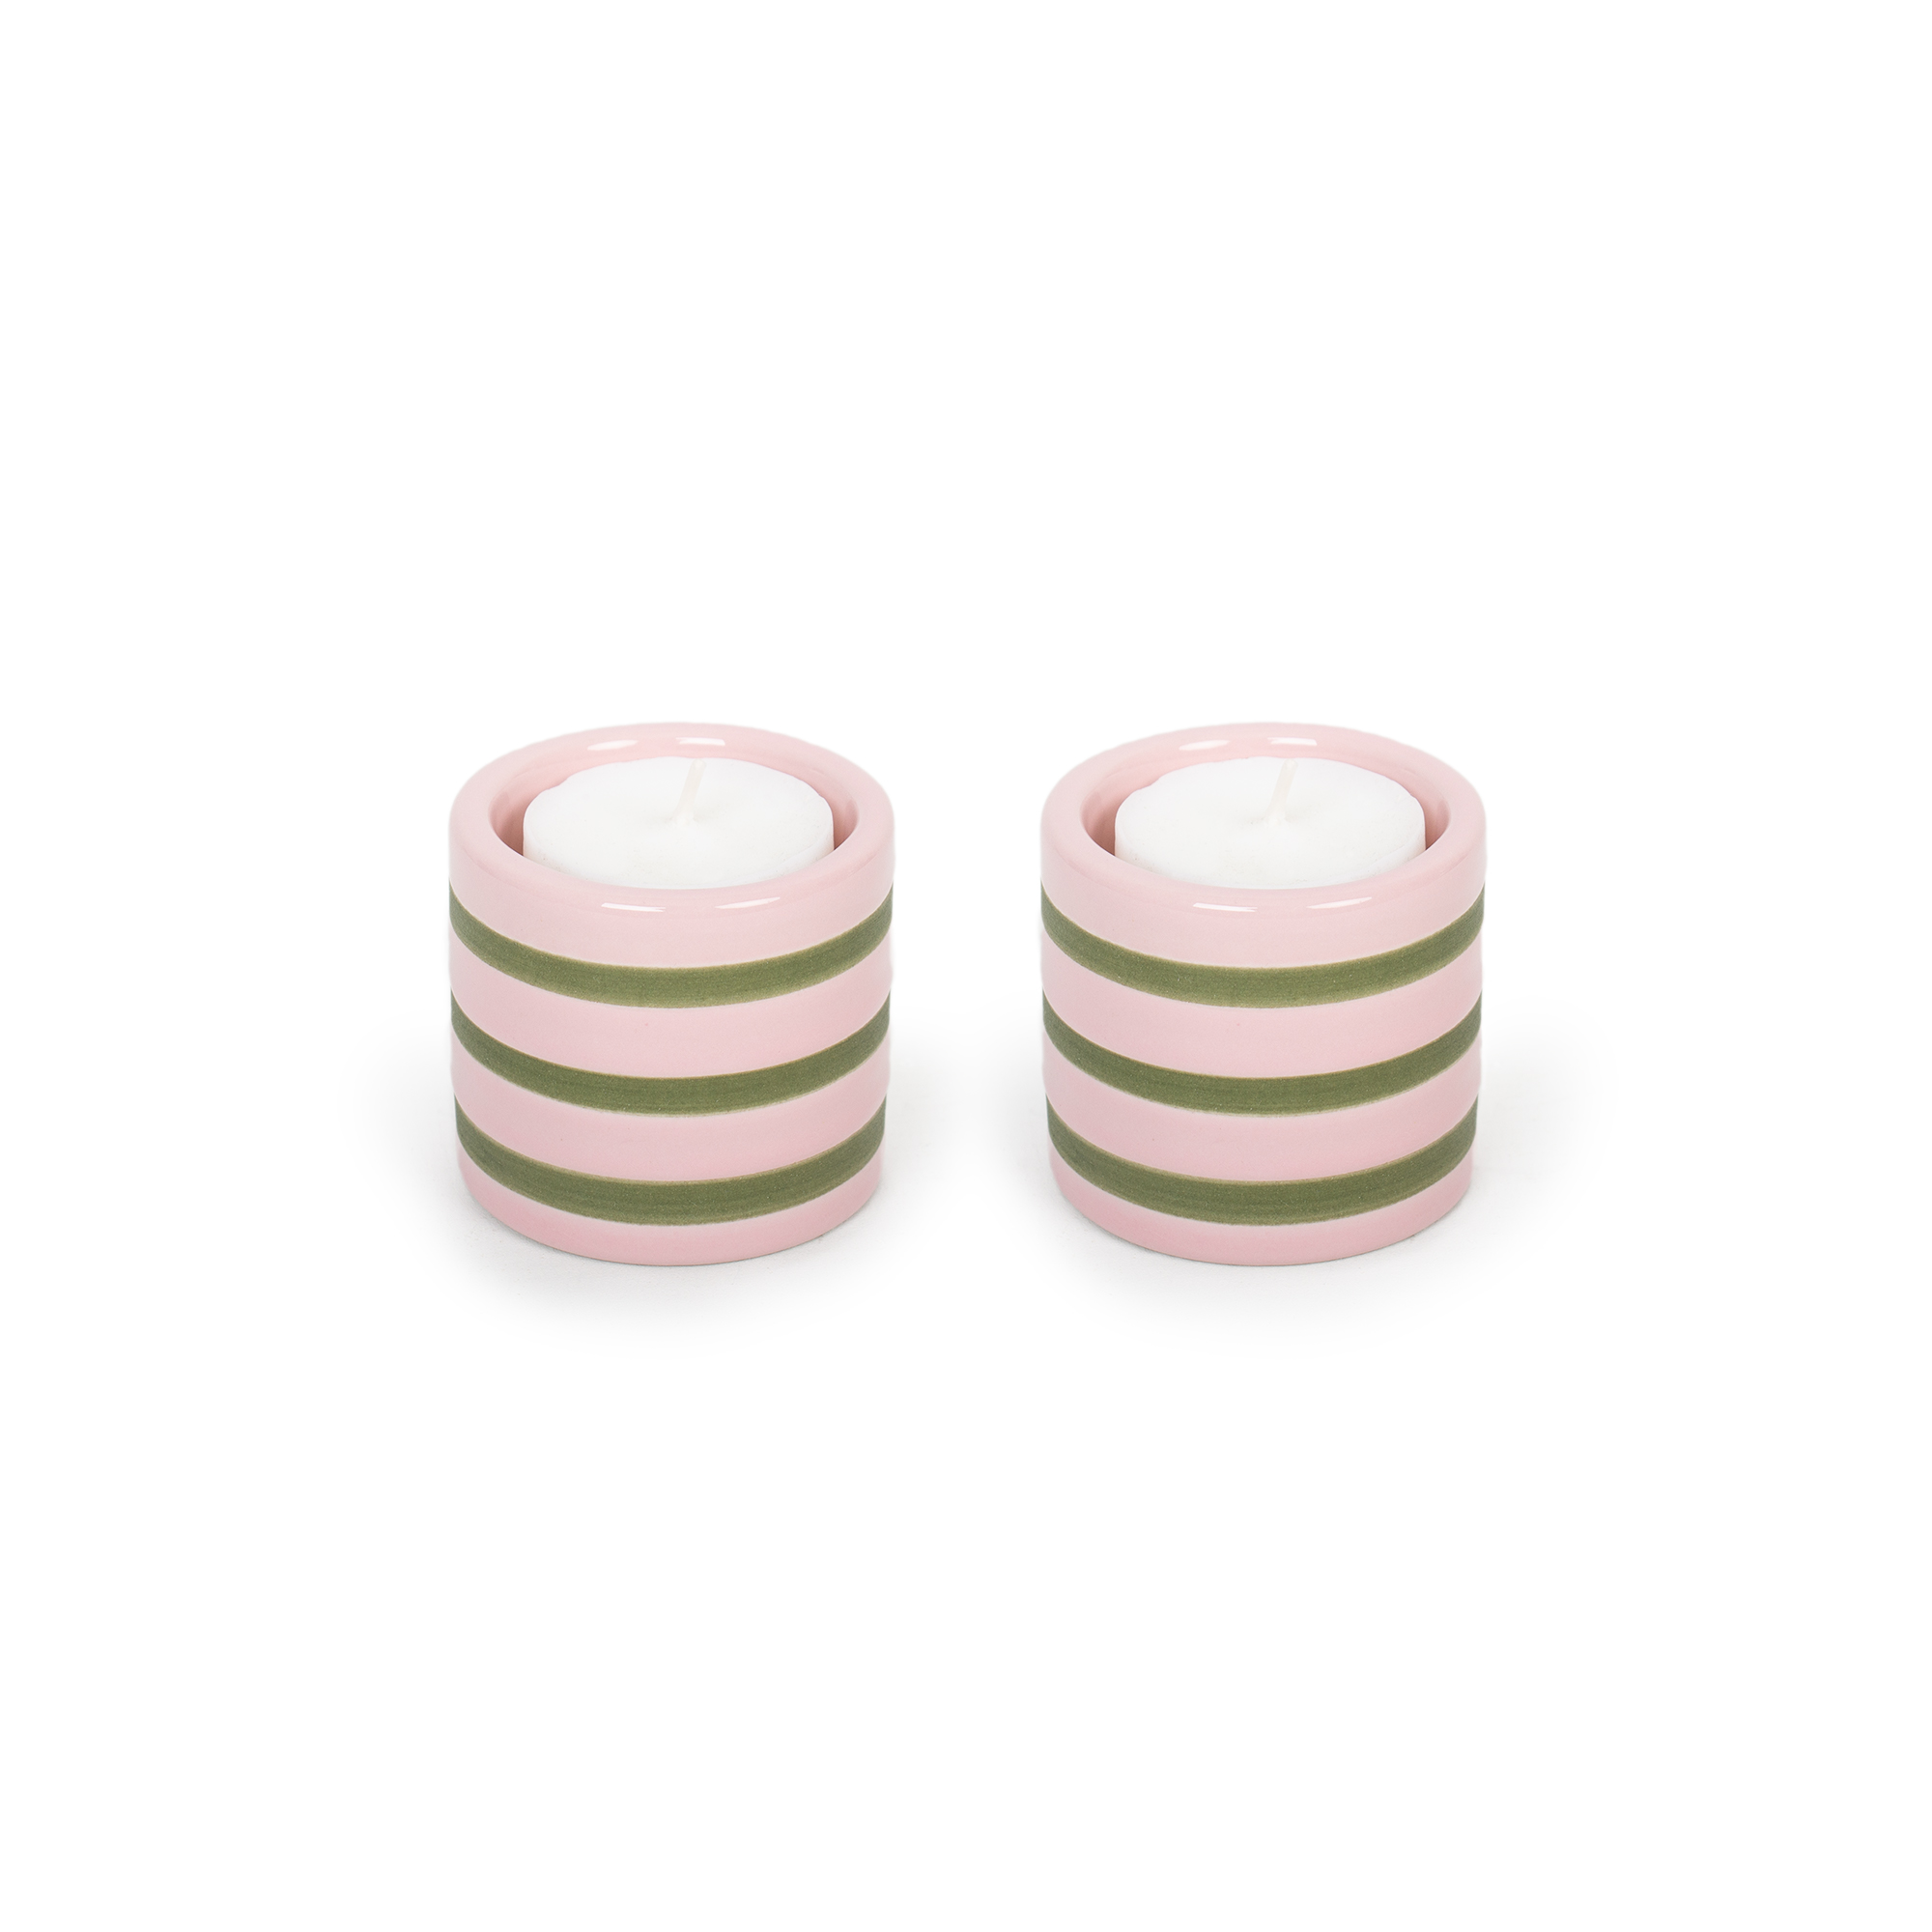 PACK OF 2 HARMONY CERAMIC CANDLE HOLDERS HF